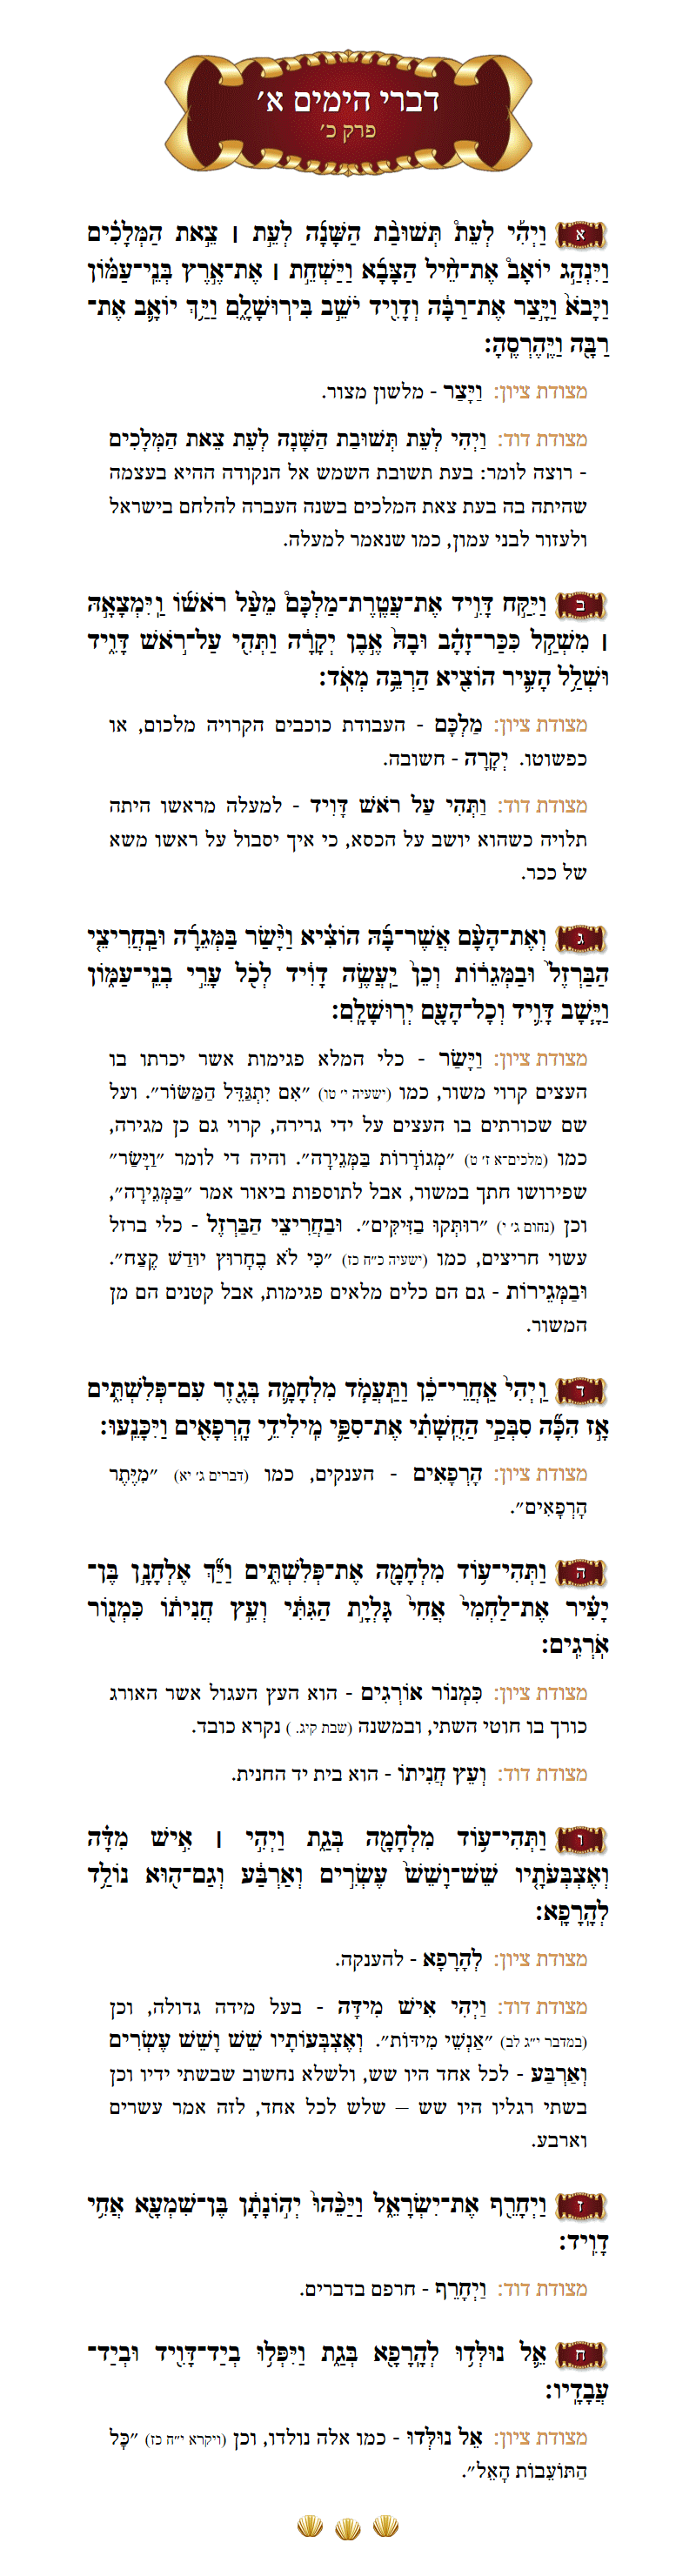 Sefer Divrei Hayomim 1 Chapter 20 with commentary